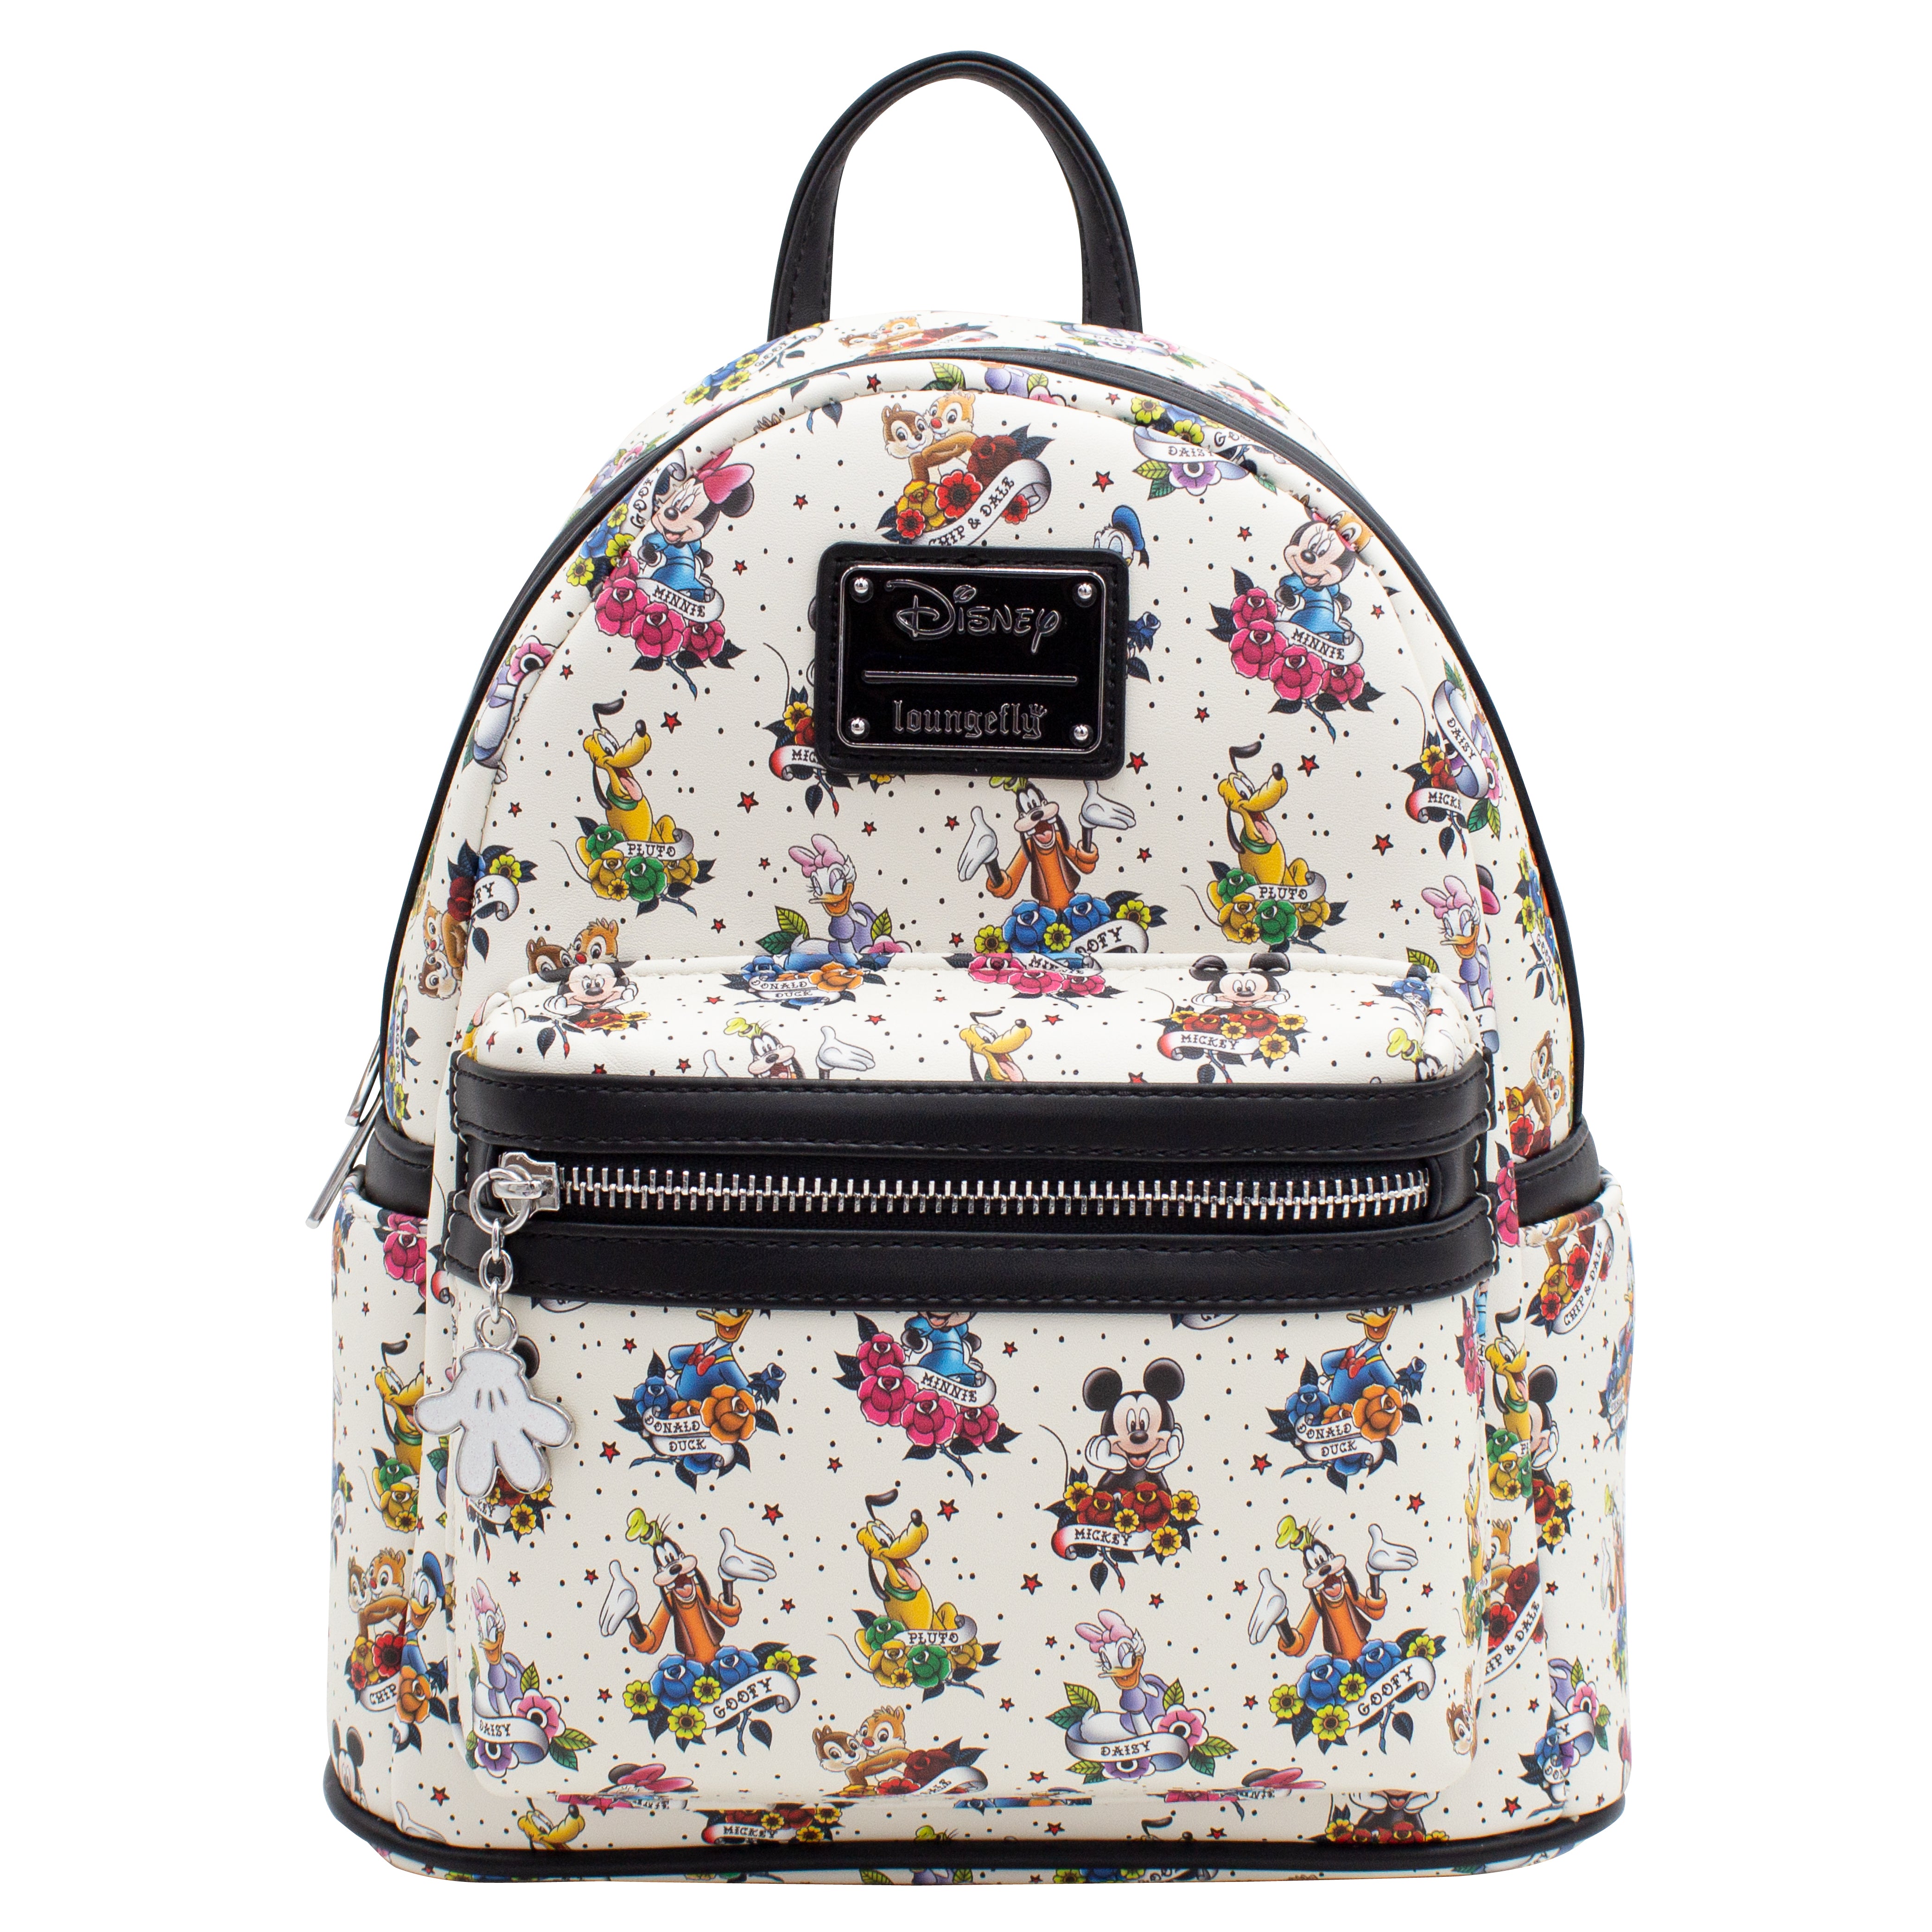 COLLECTION LOUNGE EXCLUSIVE LOUNGEFLY MICKEY AND FRIENDS TATTOO MINI BACKPACK  disney Sensational Six - Collection Lounge